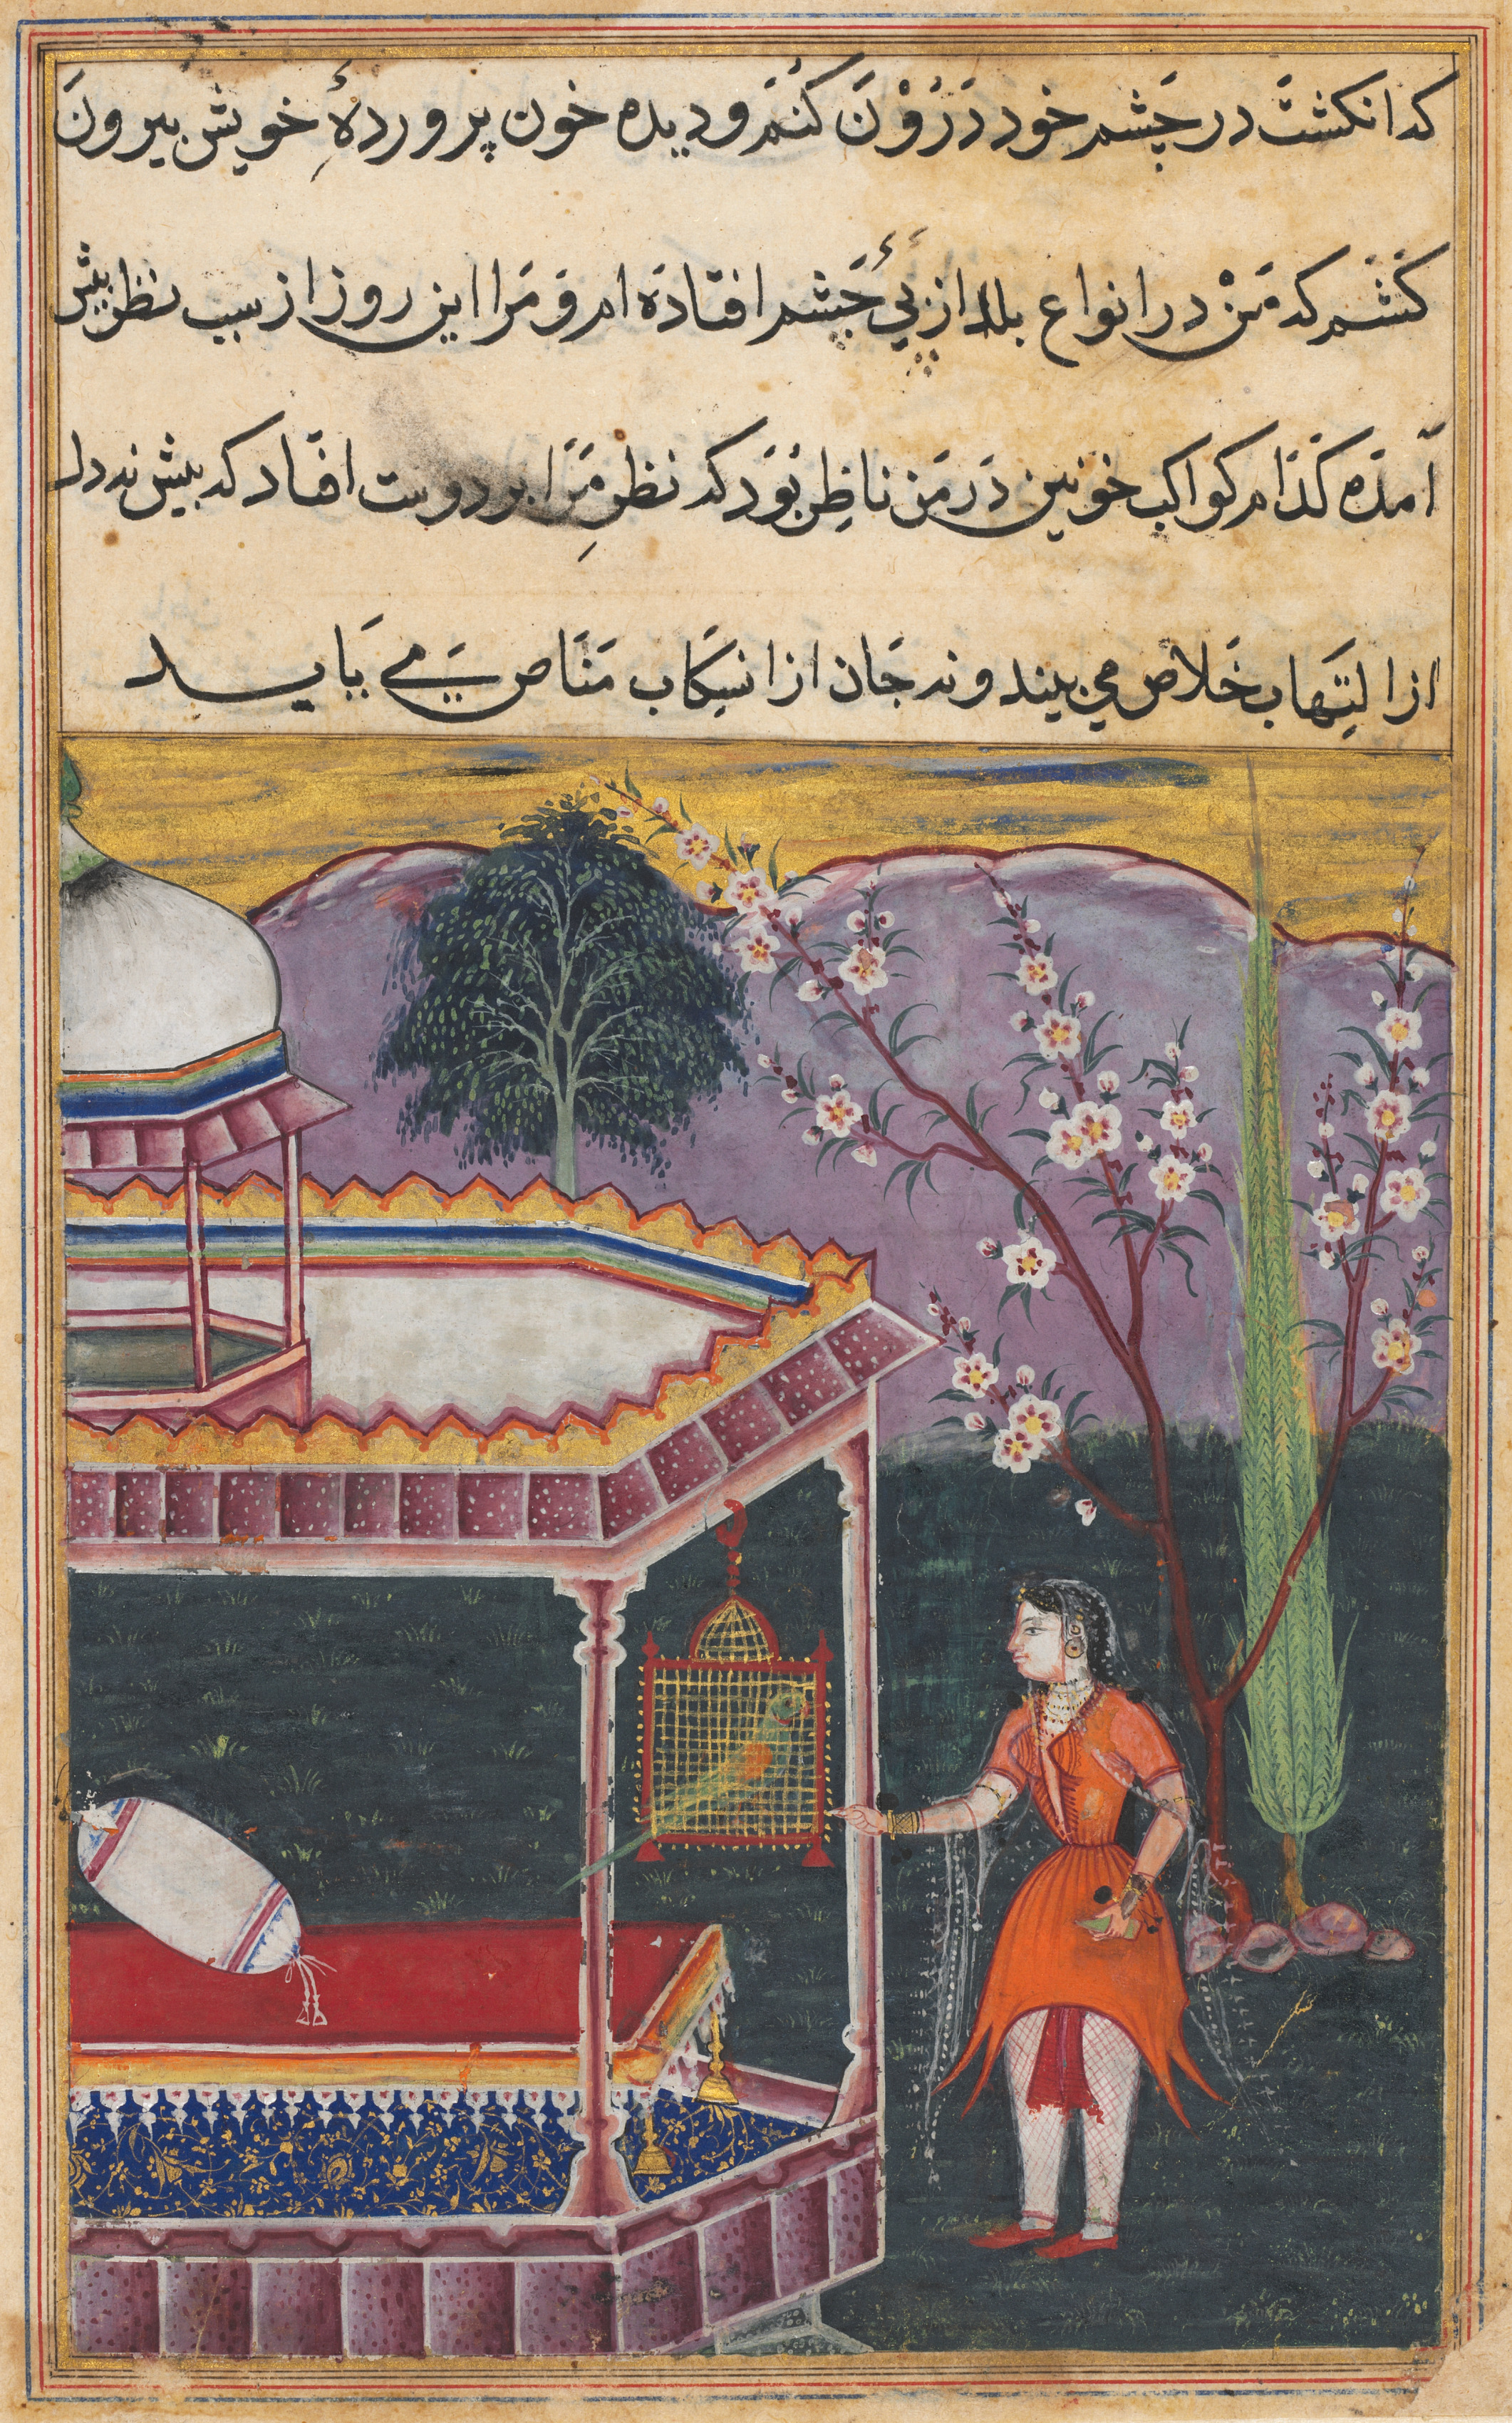 The Parrot Addresses Khujasta at the Beginning of the Eighth Night, from a Tuti-nama (Tales of a Parrot)